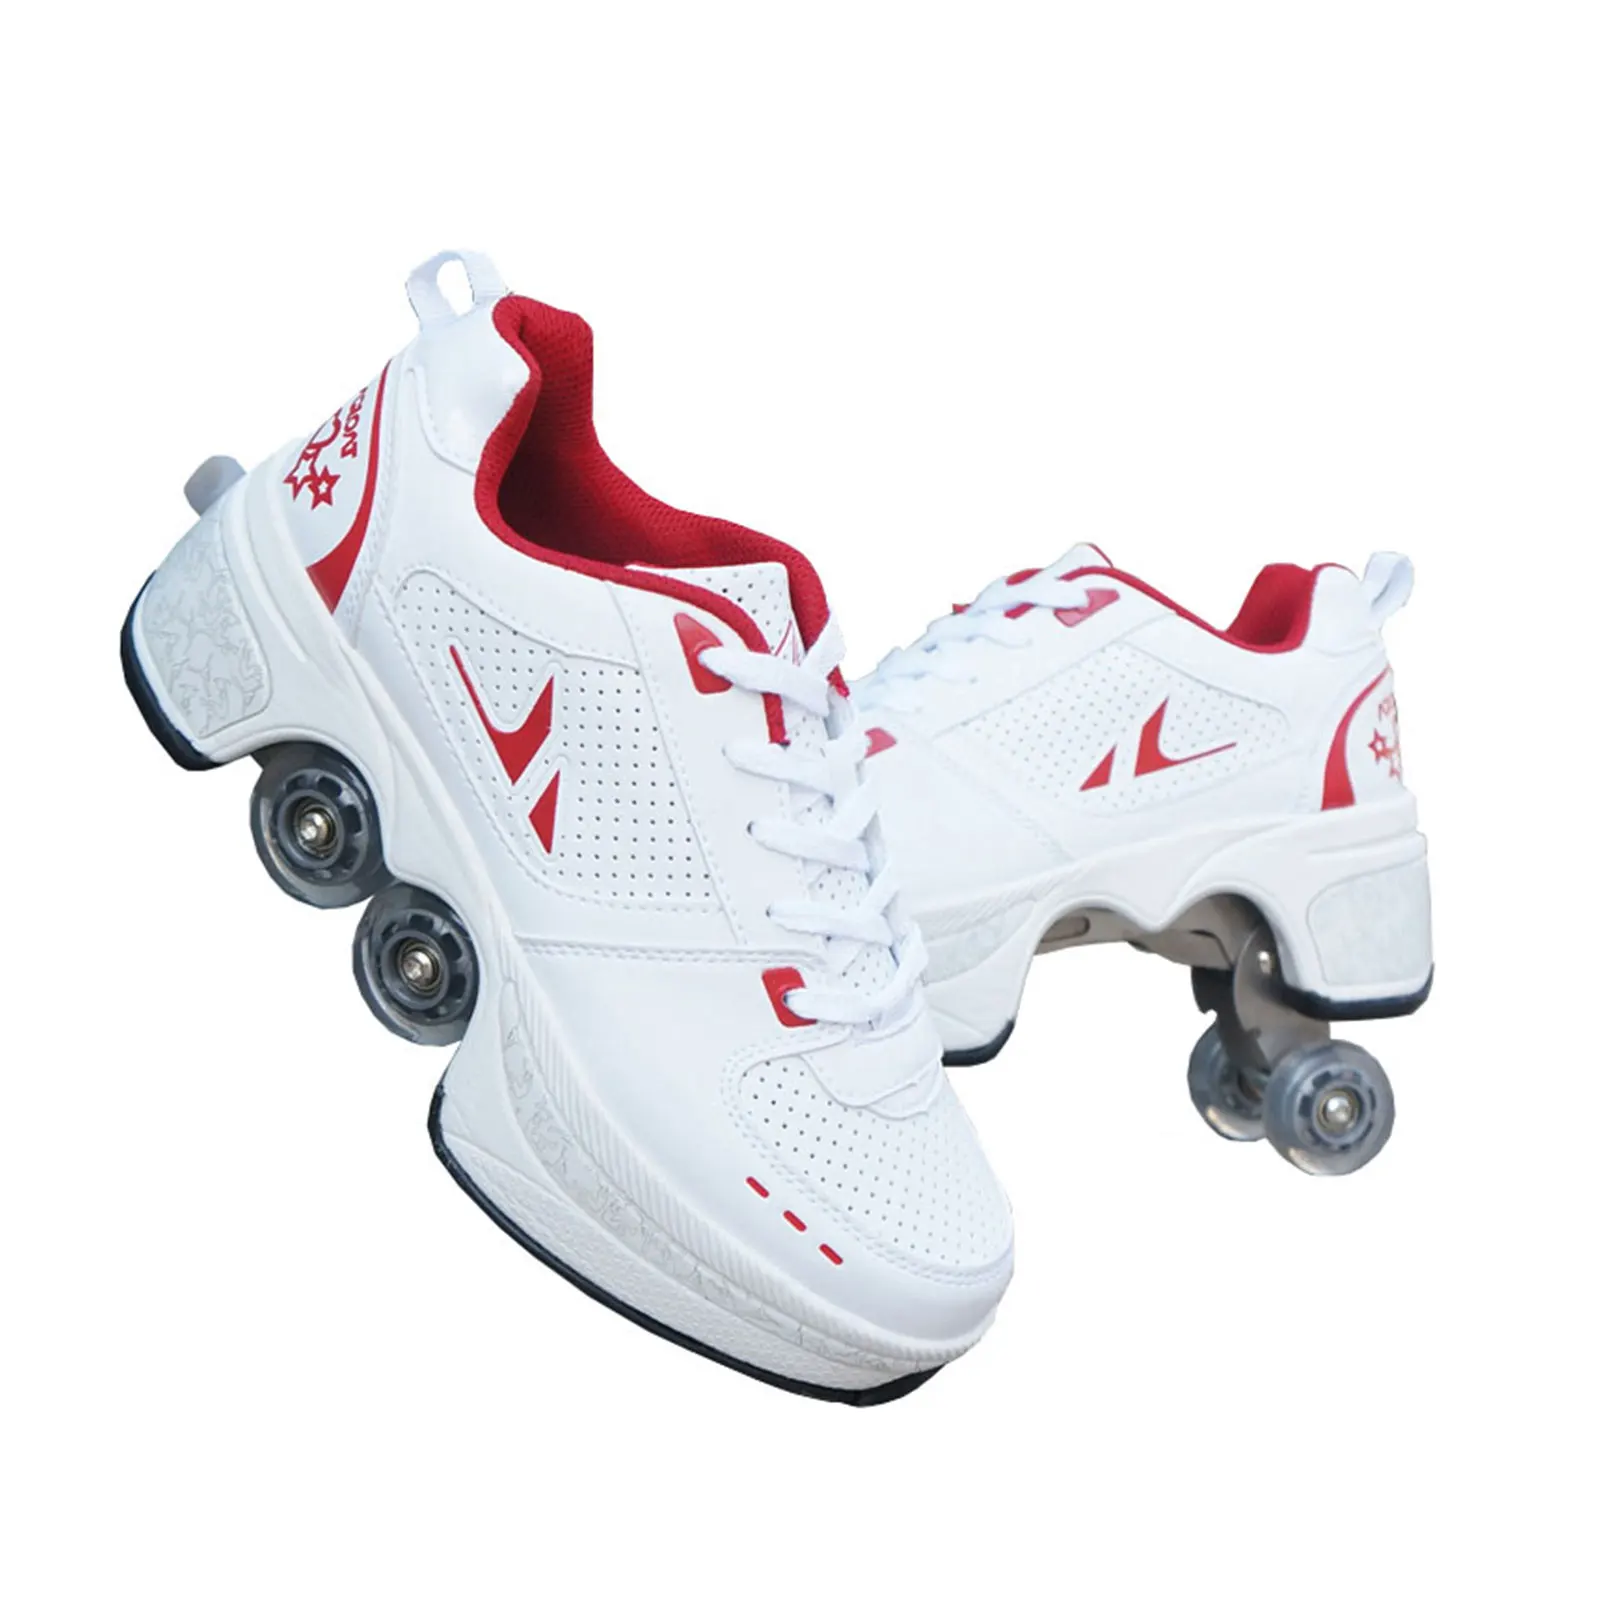 

PU Wheel Deformation Roller Shoes Invisible Pulley Skates Skating Parkour Shoes Four Wheels Rounds Breathable Running Sneakers